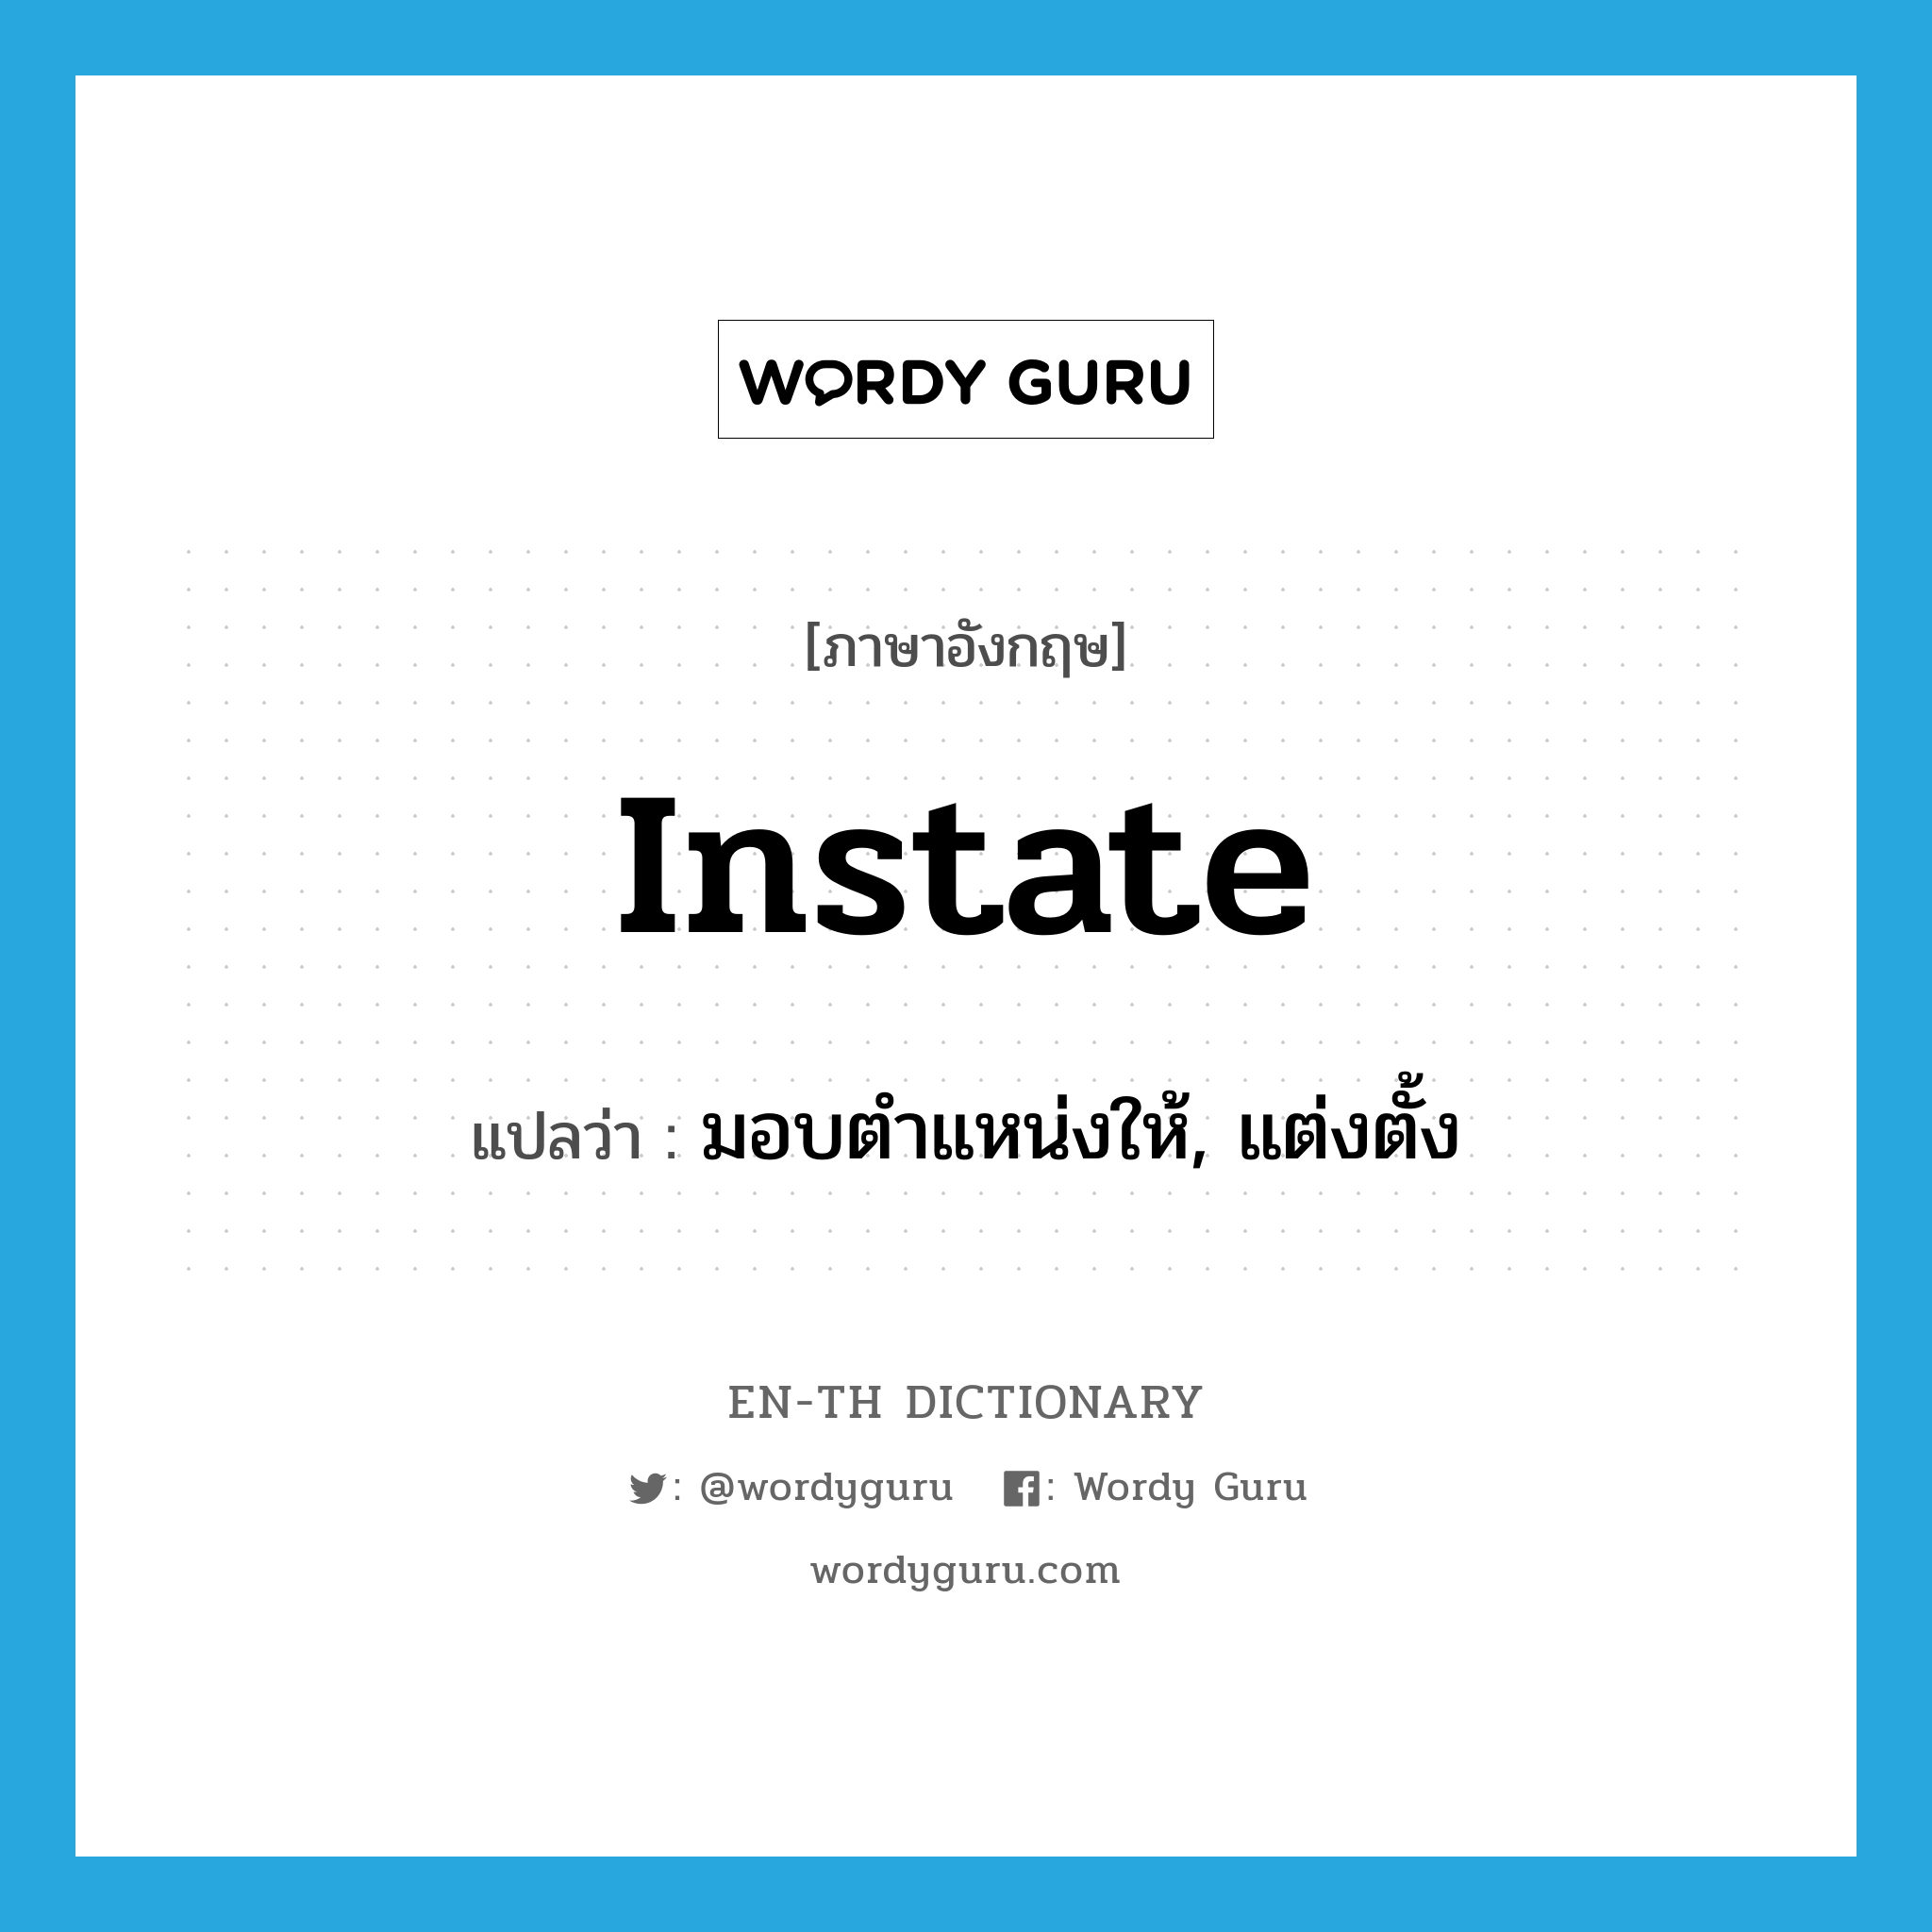 instate